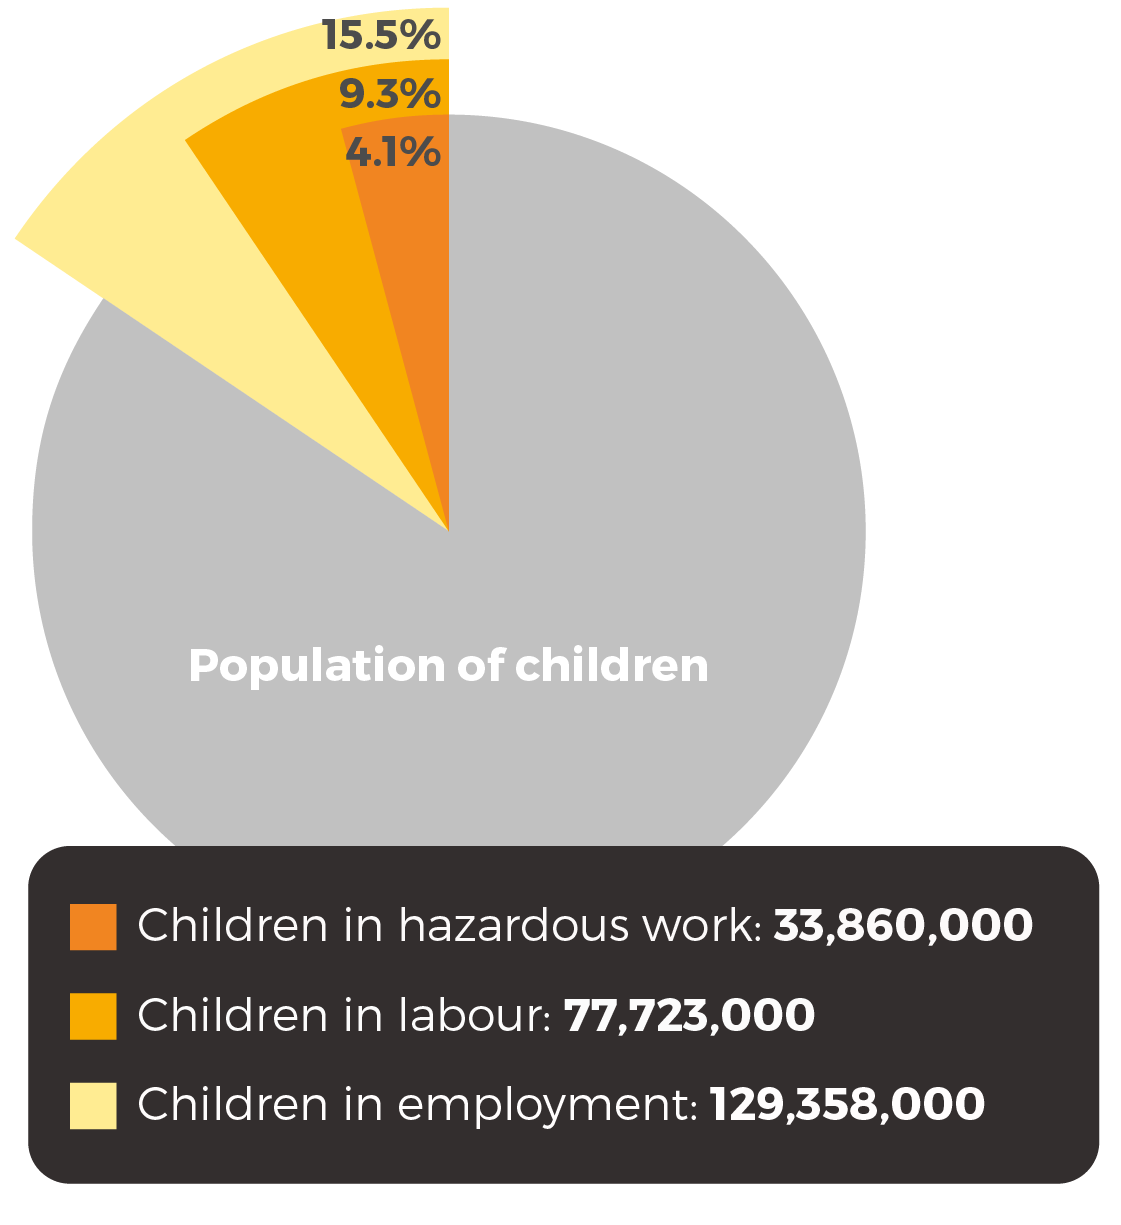 129.3m children are in employment; 77.7m are in child labour and 33.9m in hazardous work 